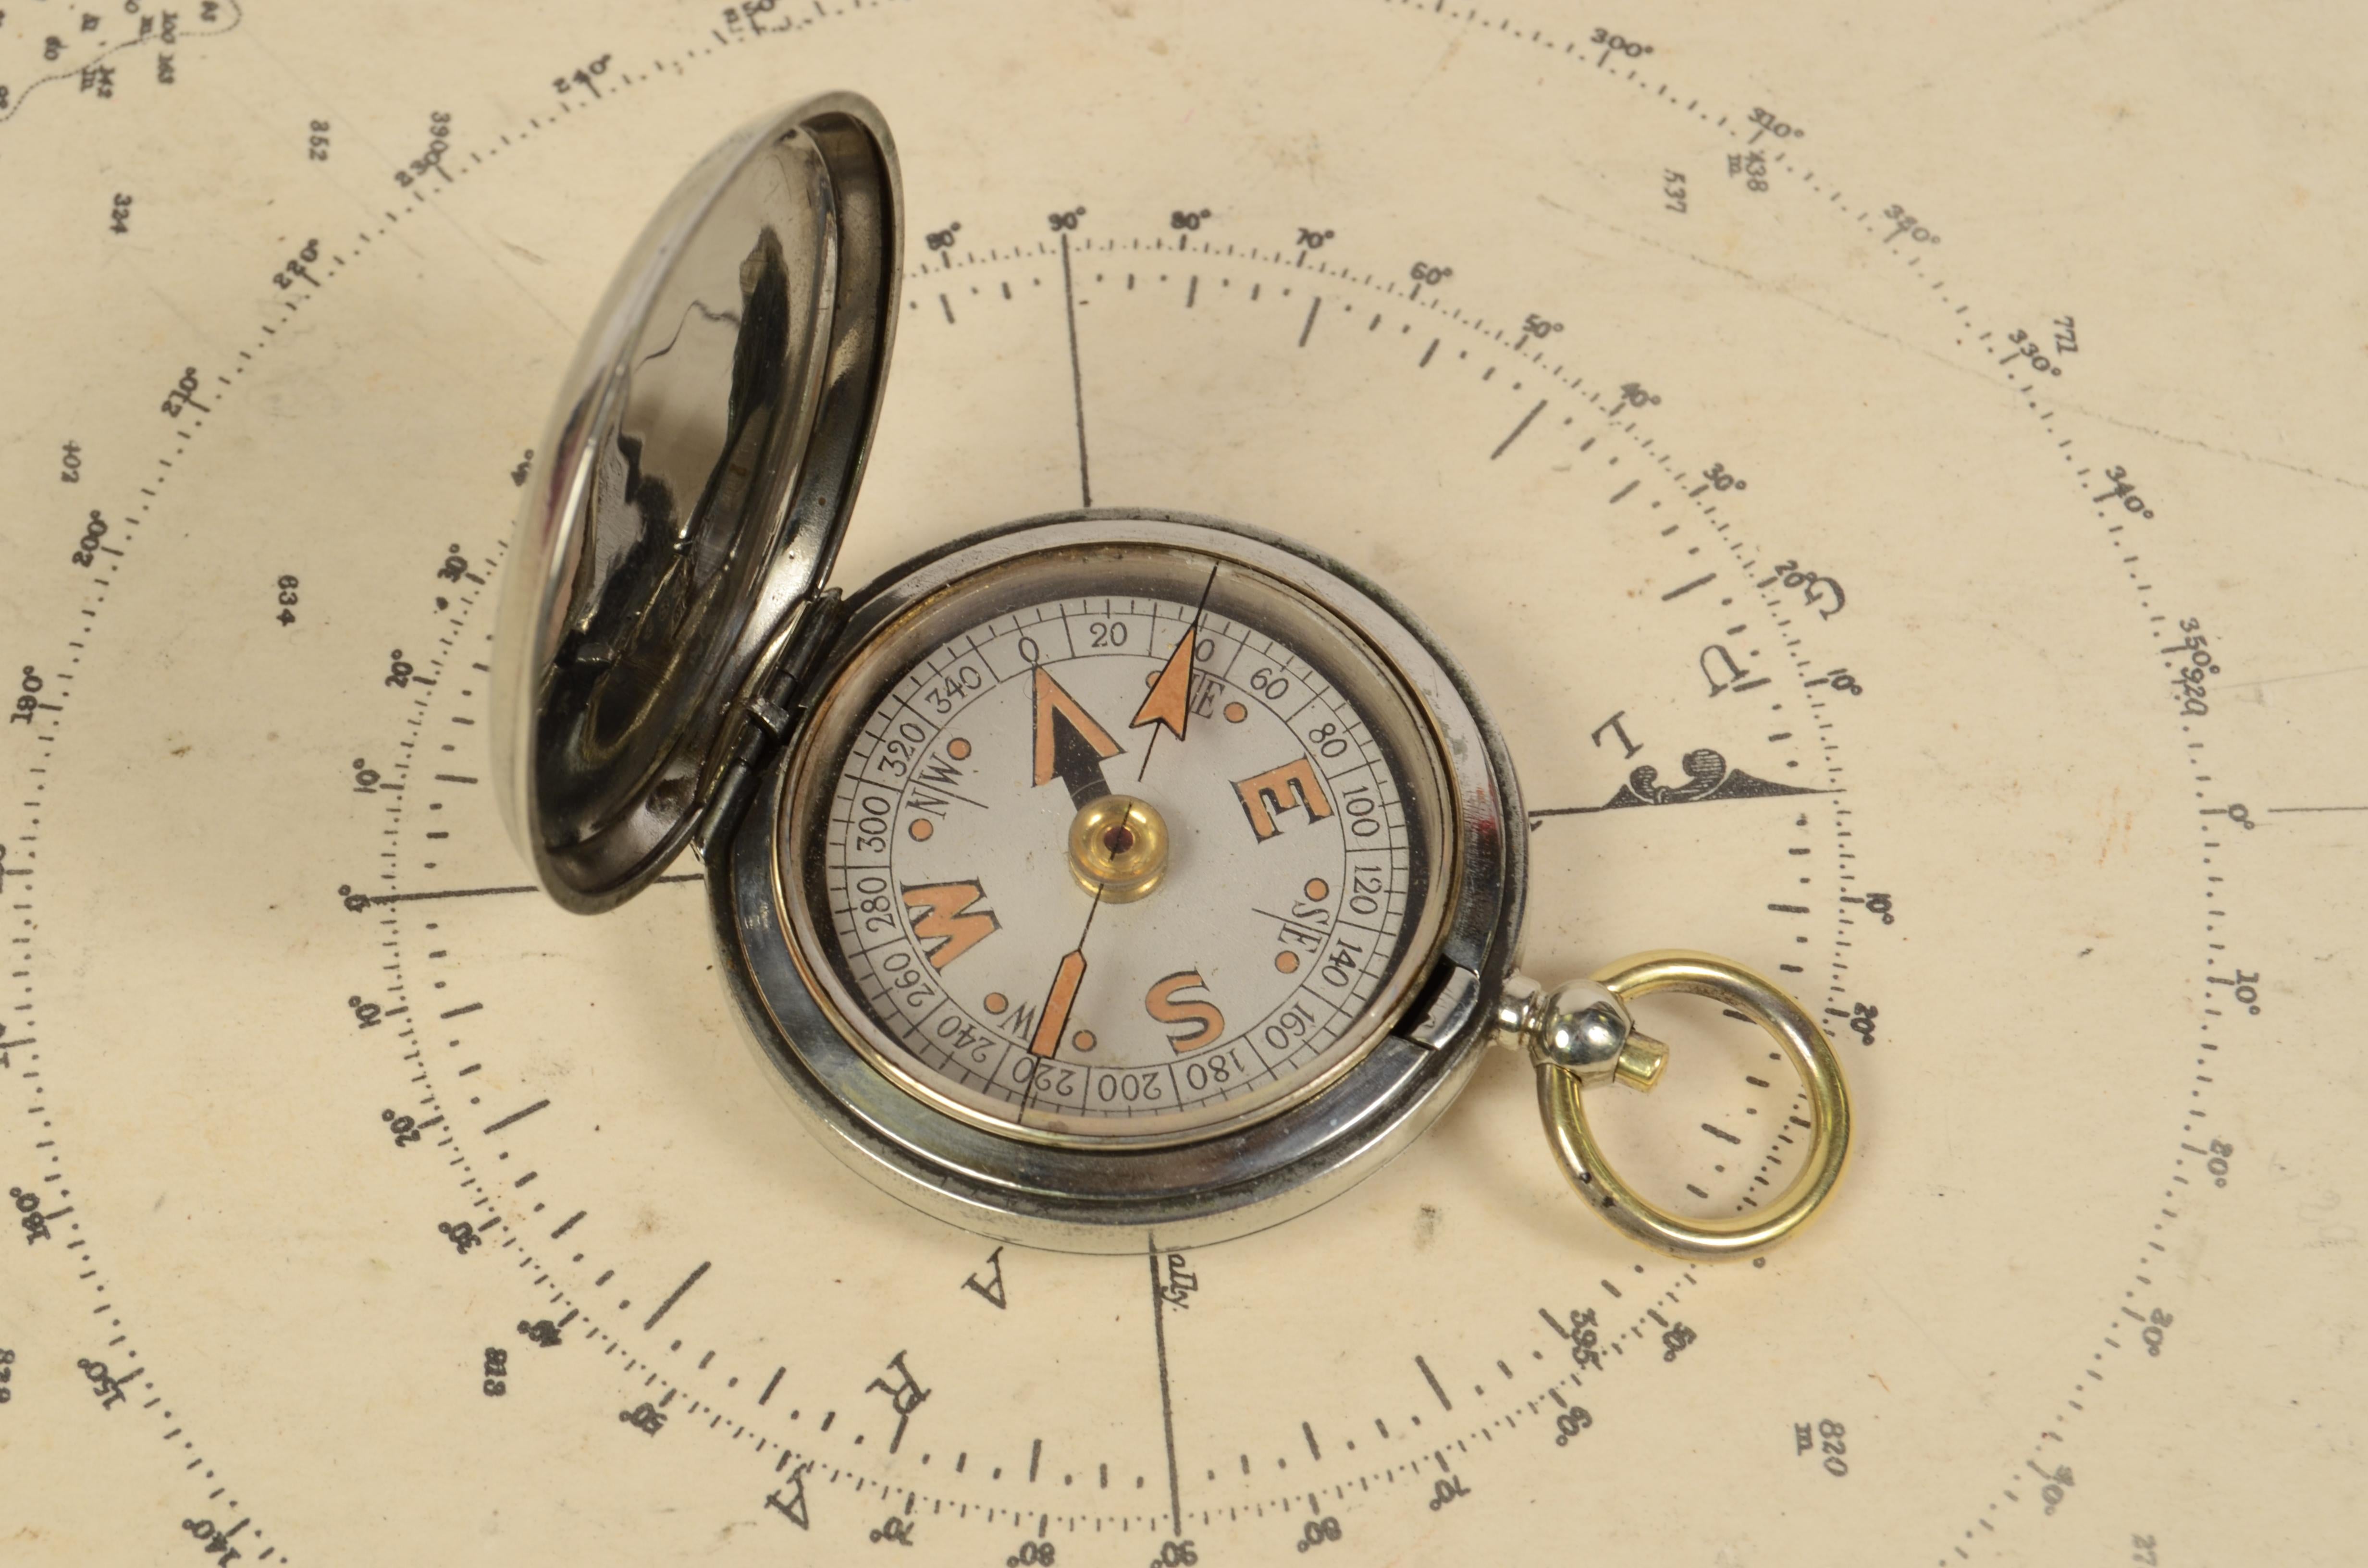 Officer pocket compass used in 1918 by British Air Force officers made of chromed brass shaped like a pocket watch. Signed Clement Clarke Ltd London VI n. 37185 1918. The compass is equipped with a lid with snap closure with release button inside